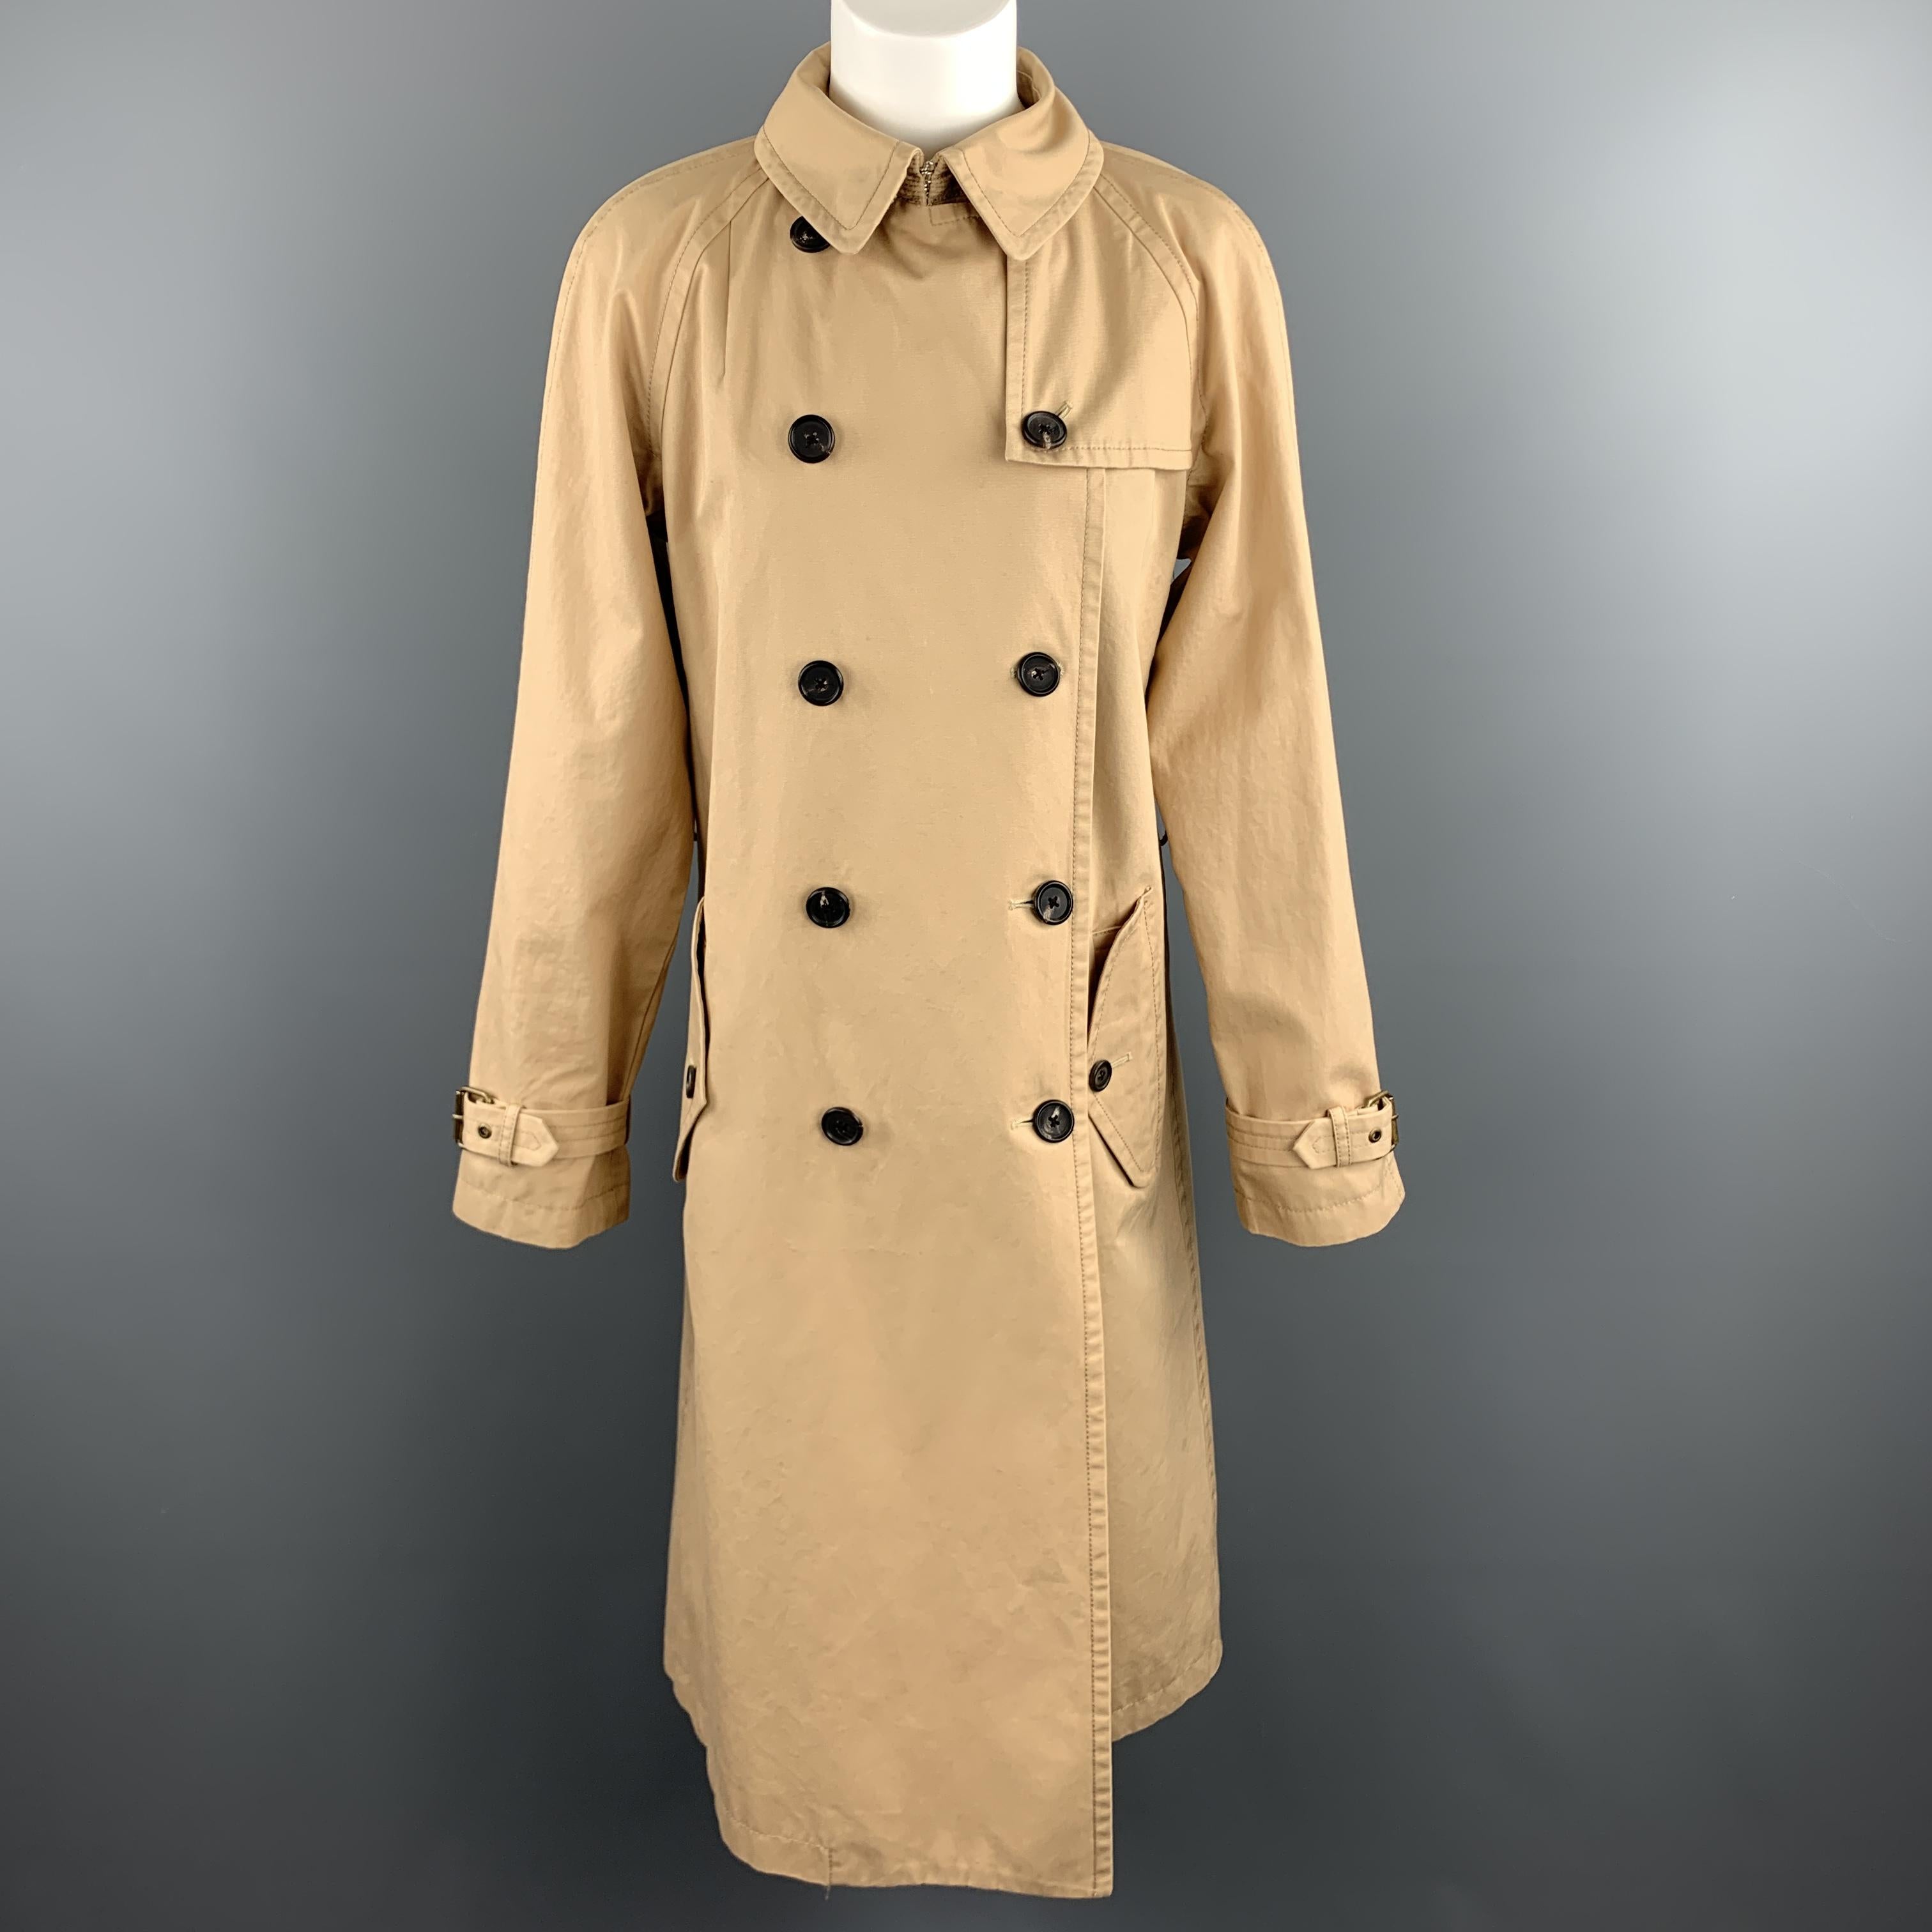 MARC JACOBS trench coat comes in in a warm khaki cotton twill with a double breasted button front, flap button pockets, and belted waist. Satin lined. Made in USA.

Excellent Pre-Owned Condition.
Marked: US 6

Measurements:

Shoulder: 17 in.
Bust: